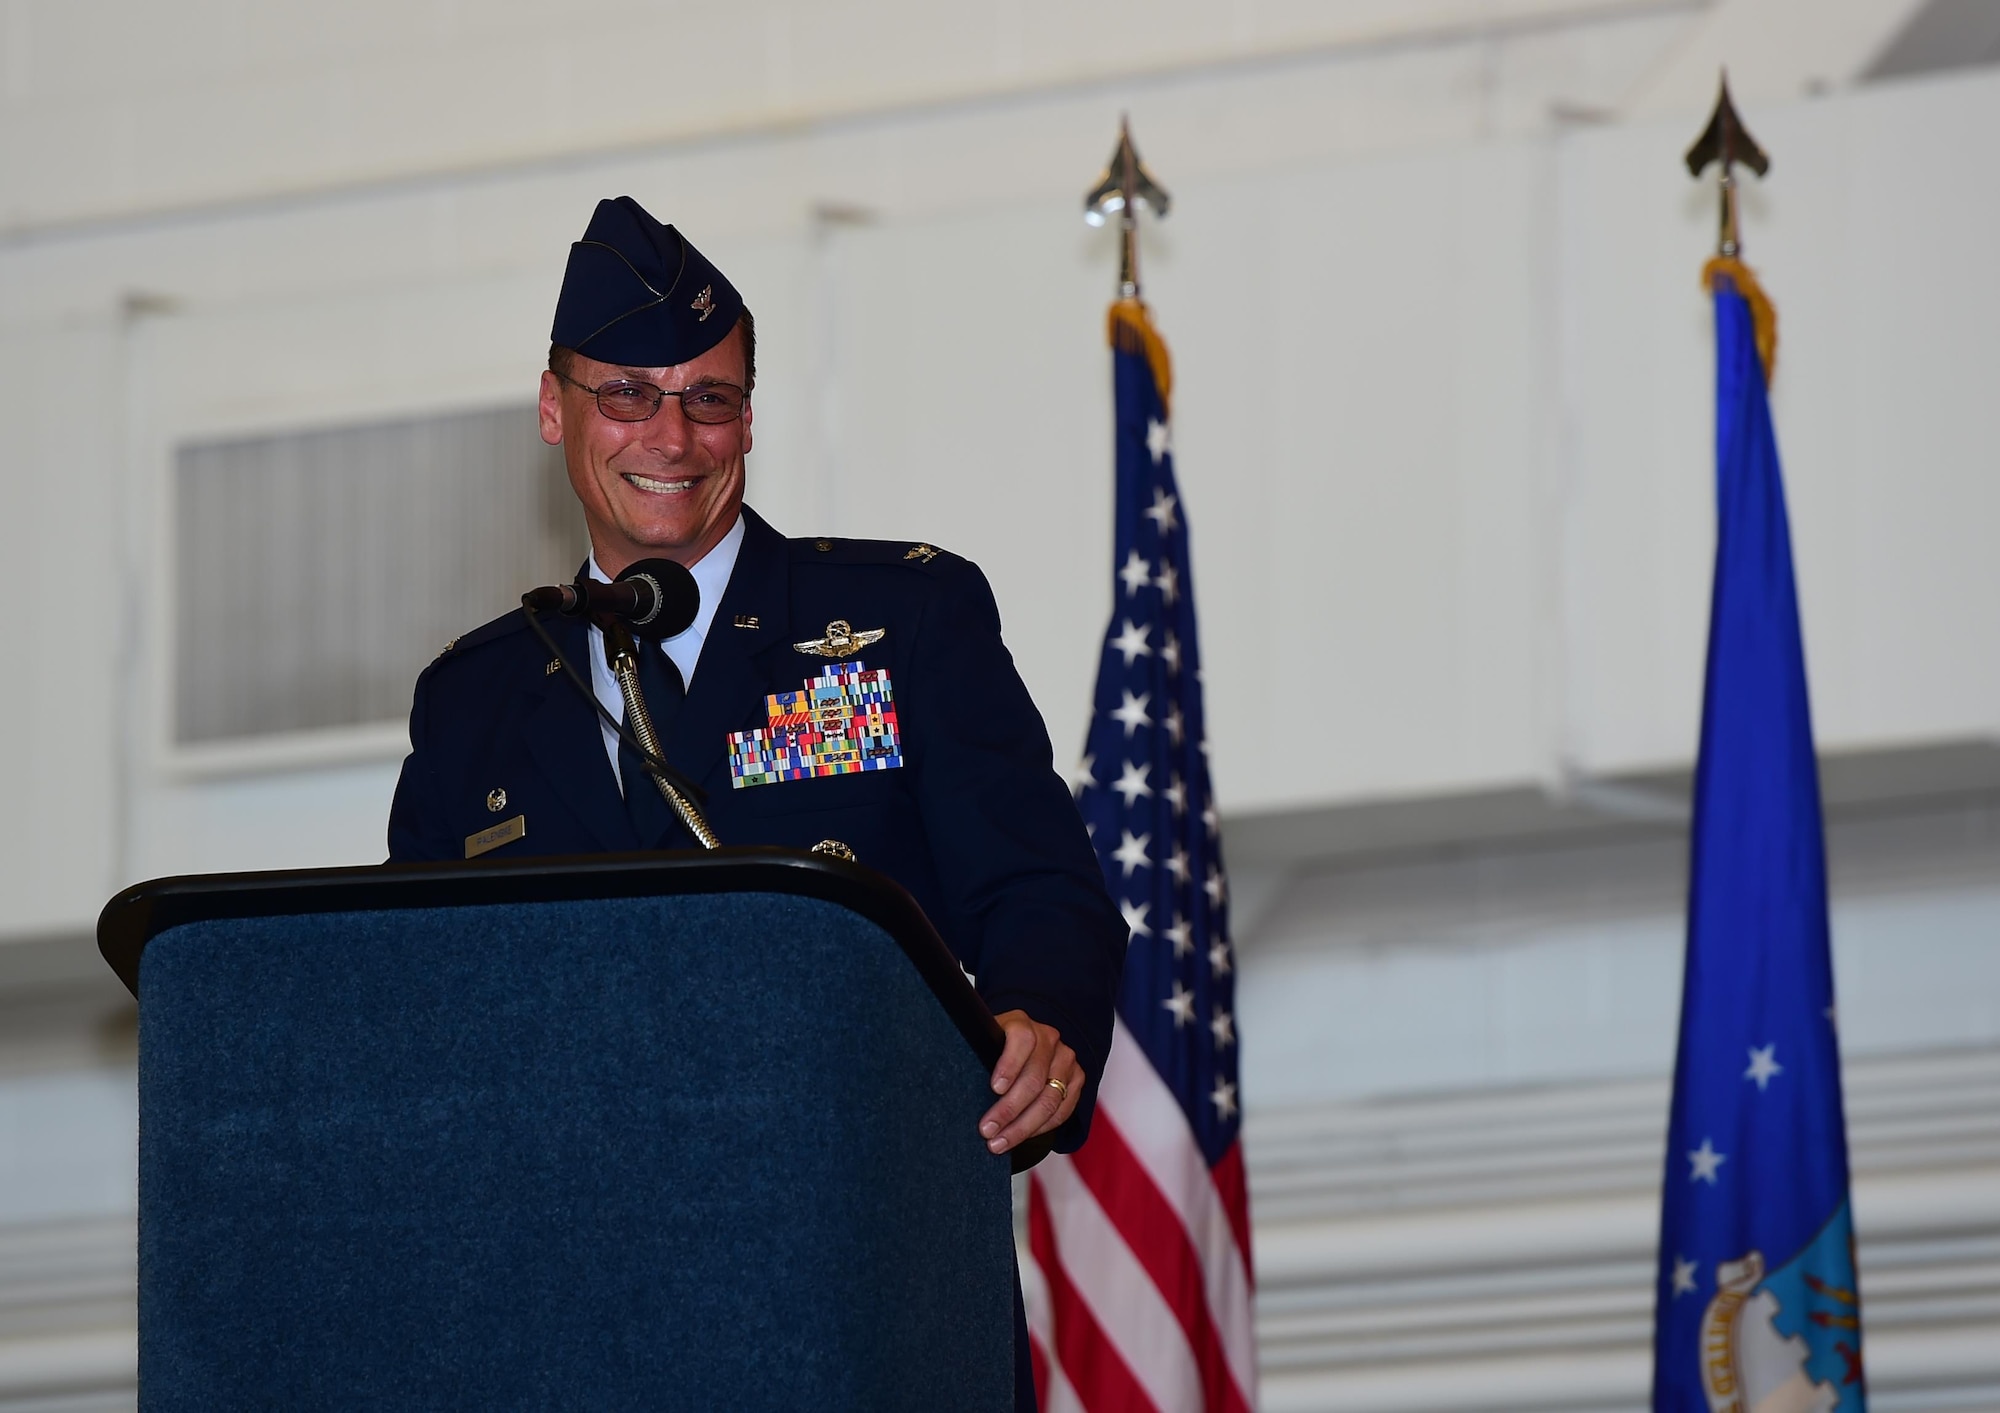 Col. Tom Palenske, commander of the 1st Special Operations Wing, addresses 1st SOW Air Commandos during a change of command ceremony at Hurlburt Field, Fla., June 10, 2016. As the commander, Palenske will oversee the wing’s mission, which includes infiltration, resupply, air refueling, precision fire support and employing more than 70 aircraft. (U.S. Air Force photo by Senior Airman Andrea Posey)